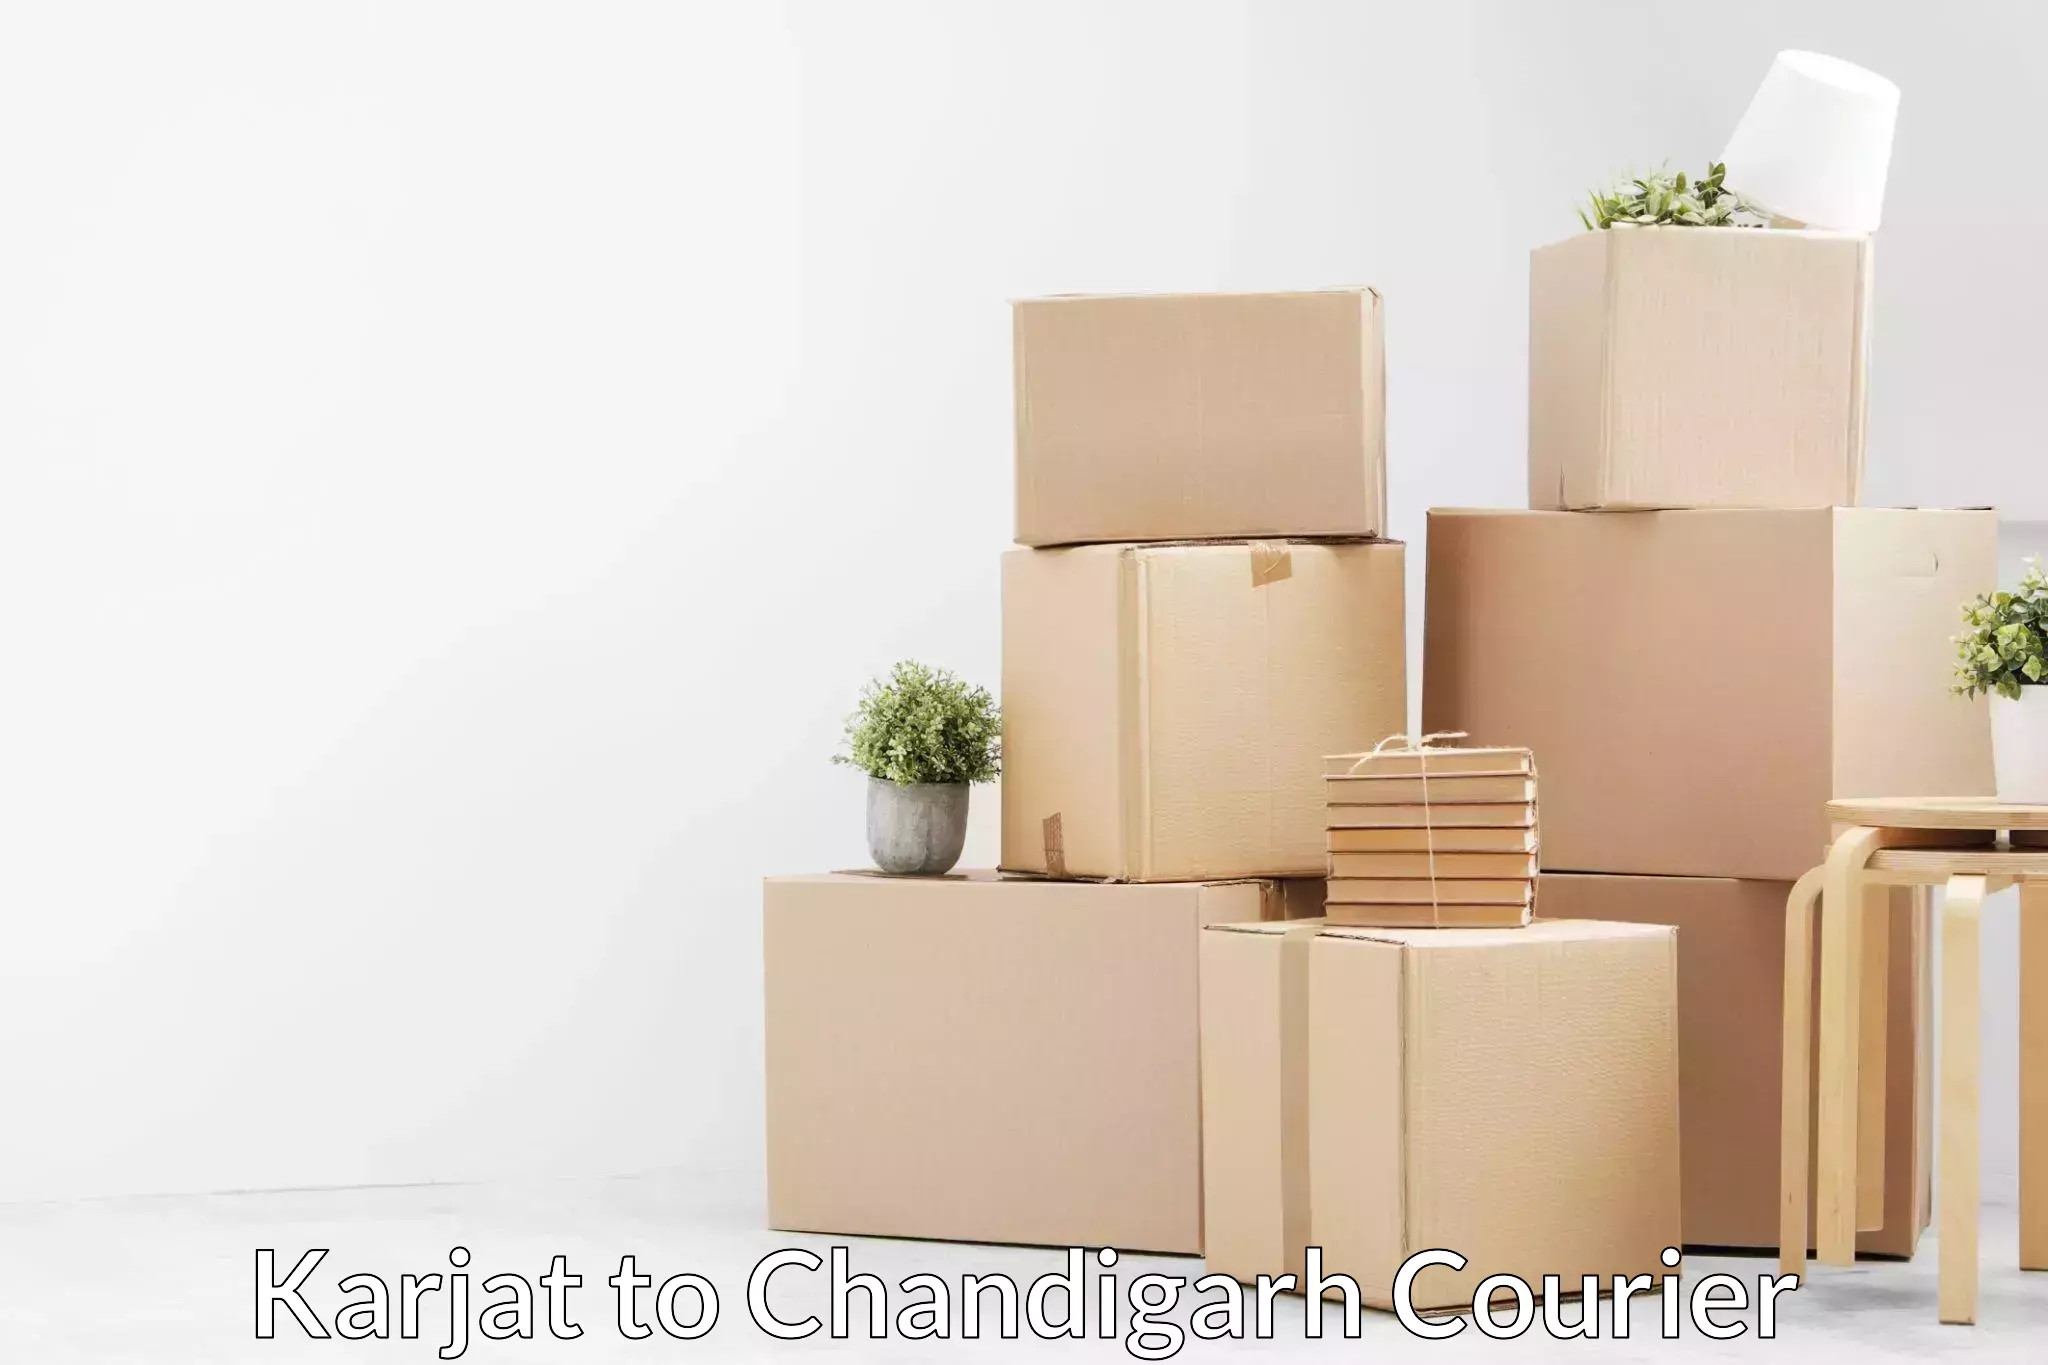 Professional packing services Karjat to Chandigarh